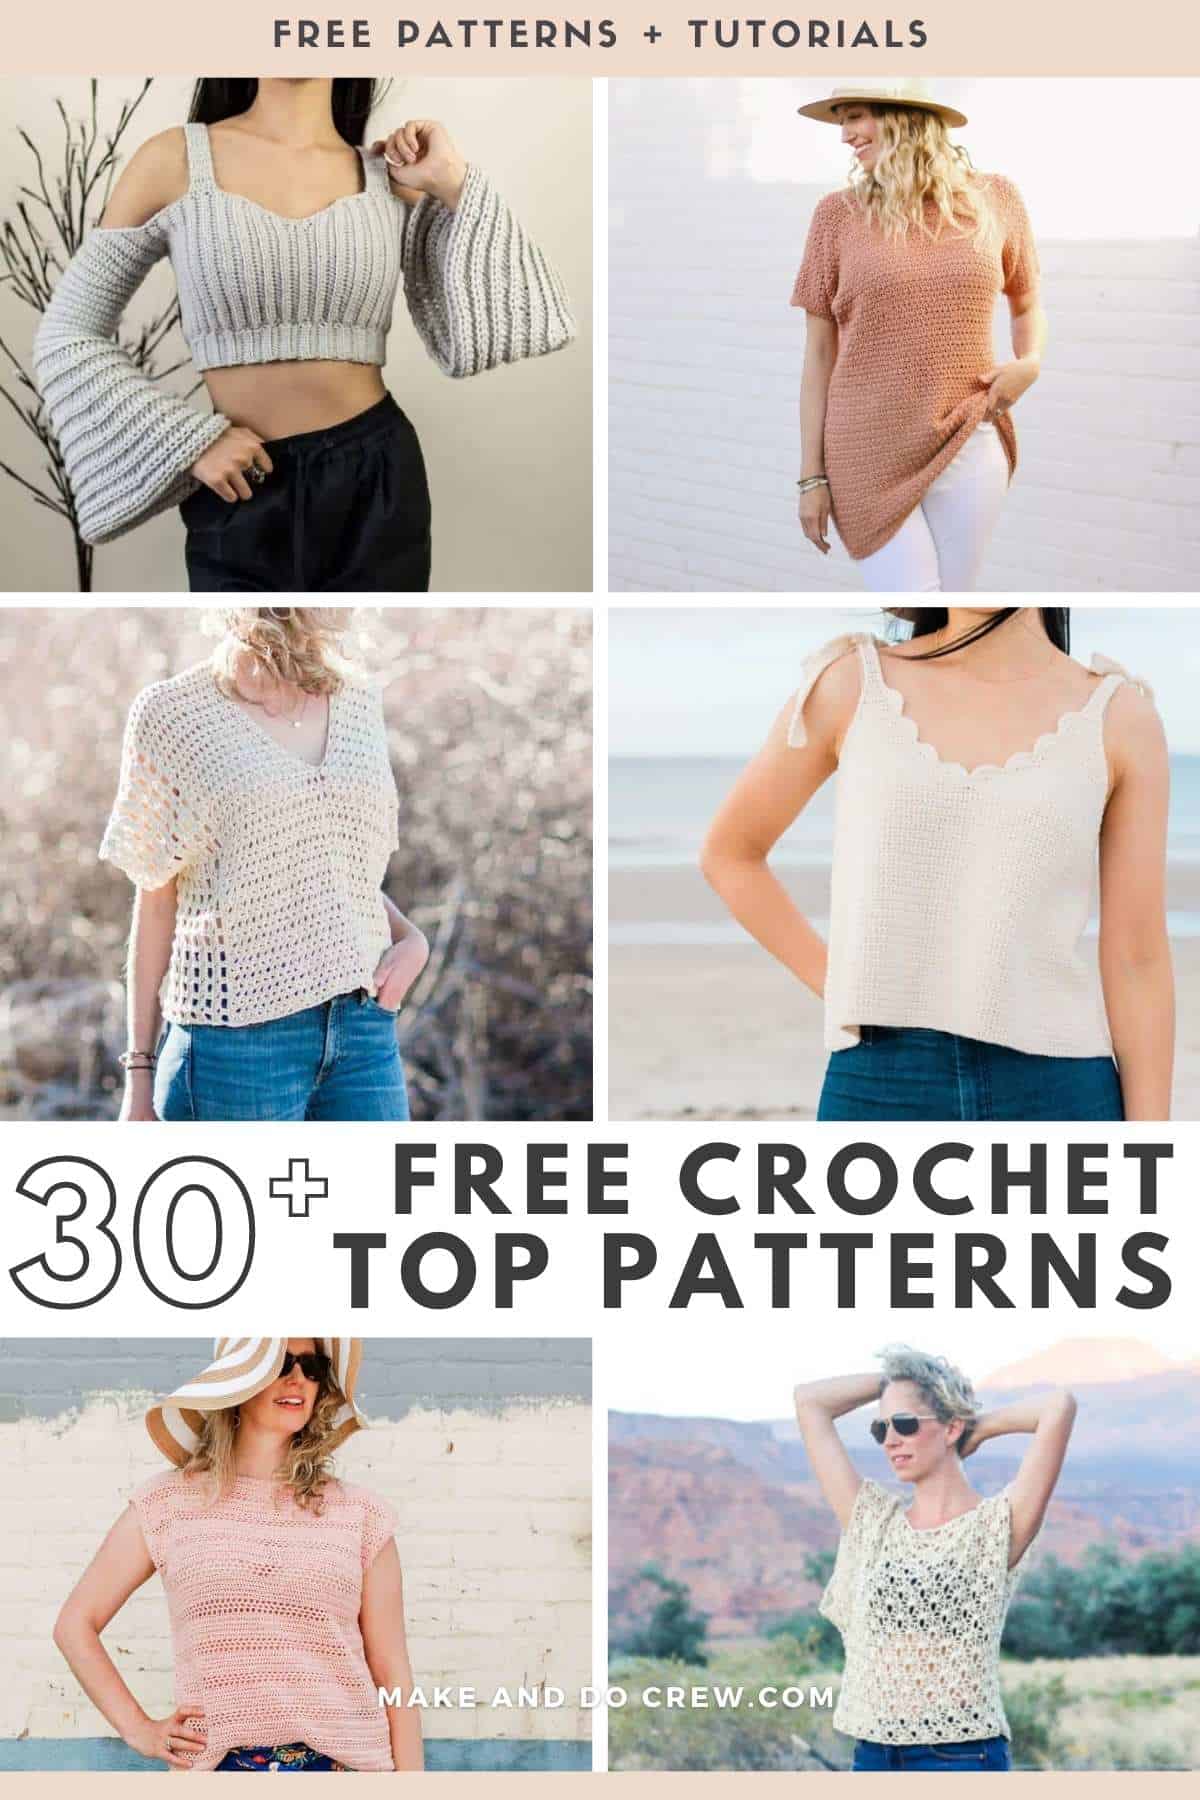 A collage of six photos of women wearing different kinds of crochet tops in white, pink and gray colors. 